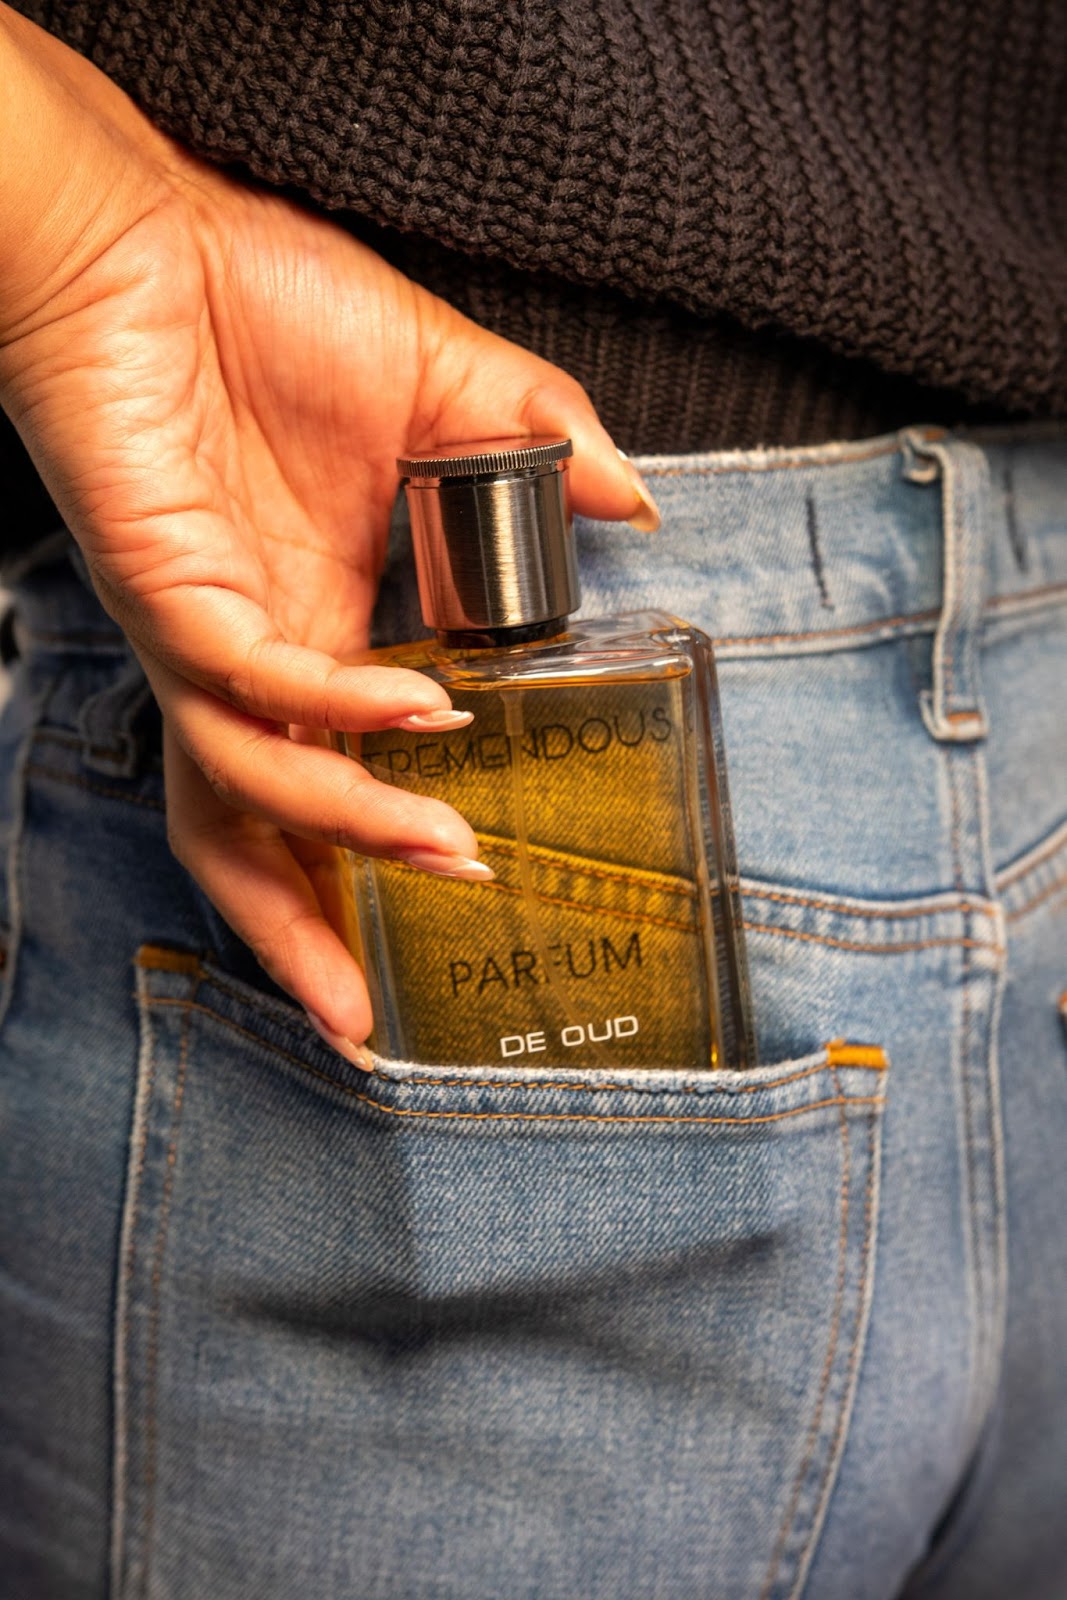 Tremendous Parfum, Wednesday, March 29, 2023, Press release picture